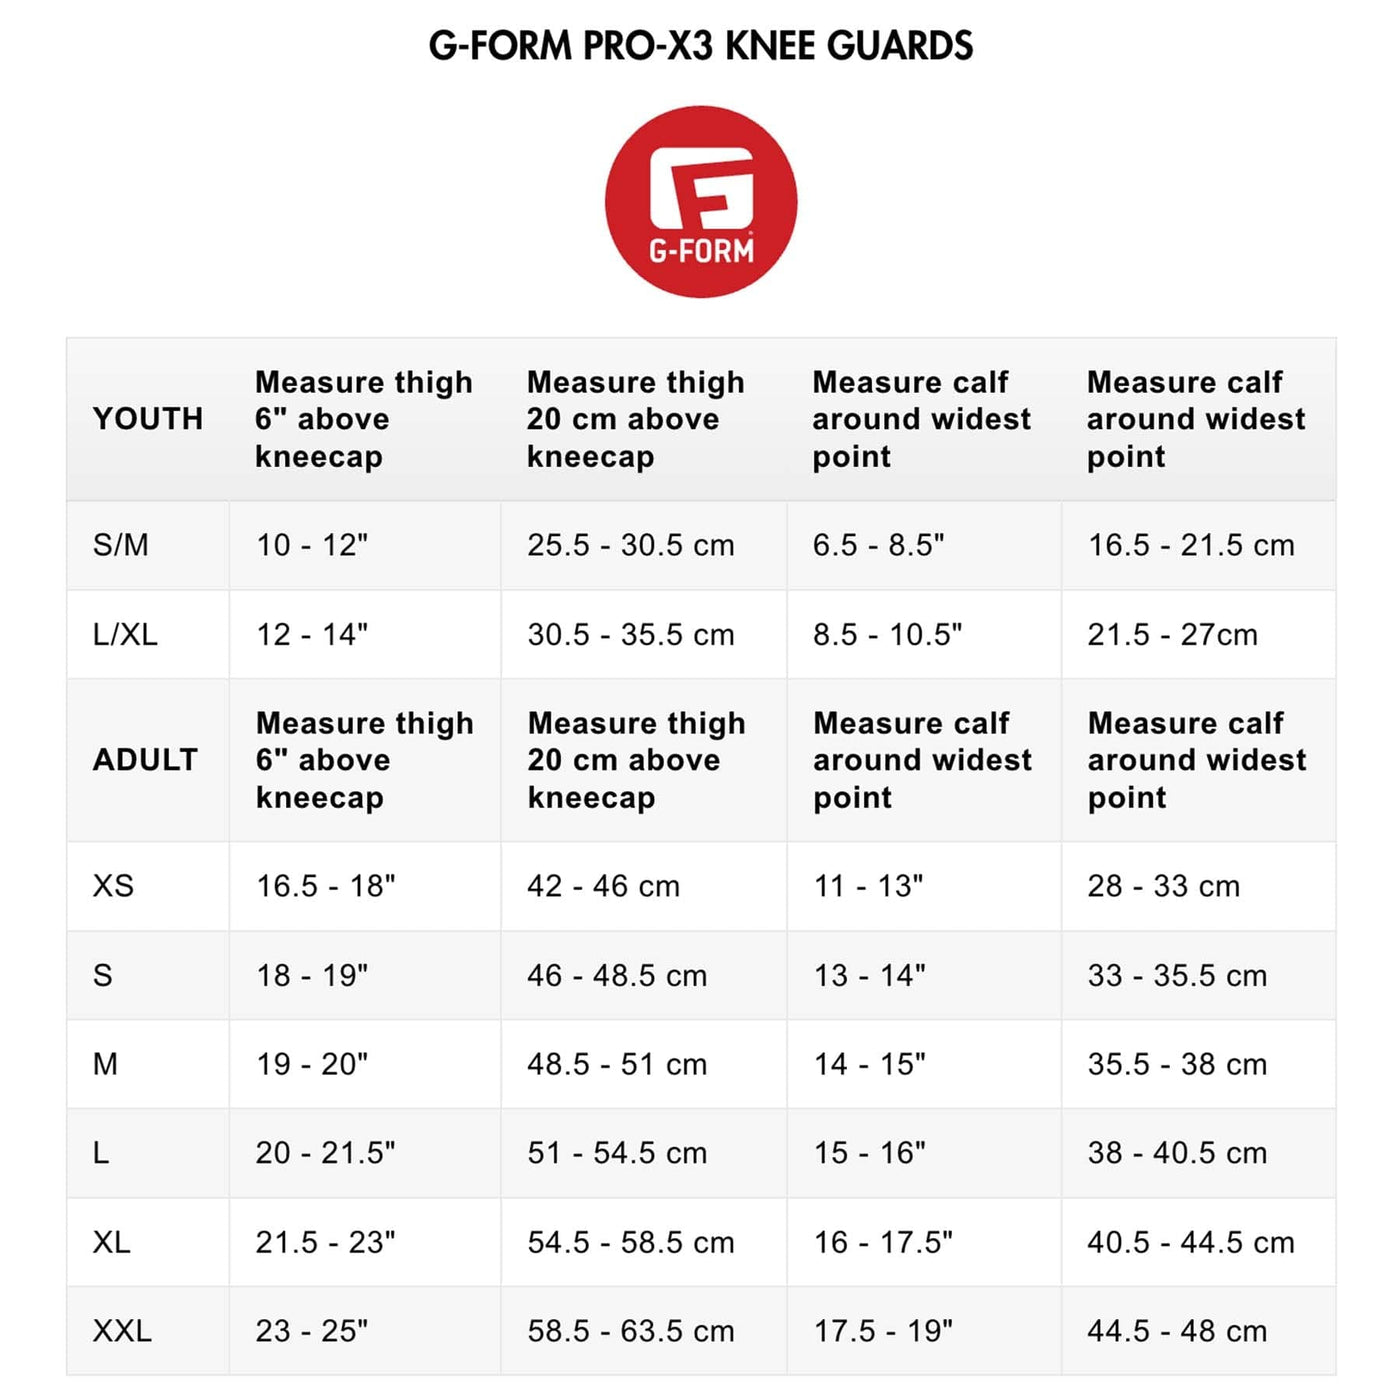 G-FORM PRO-X3 KNEE GUARDS SIZE CHART